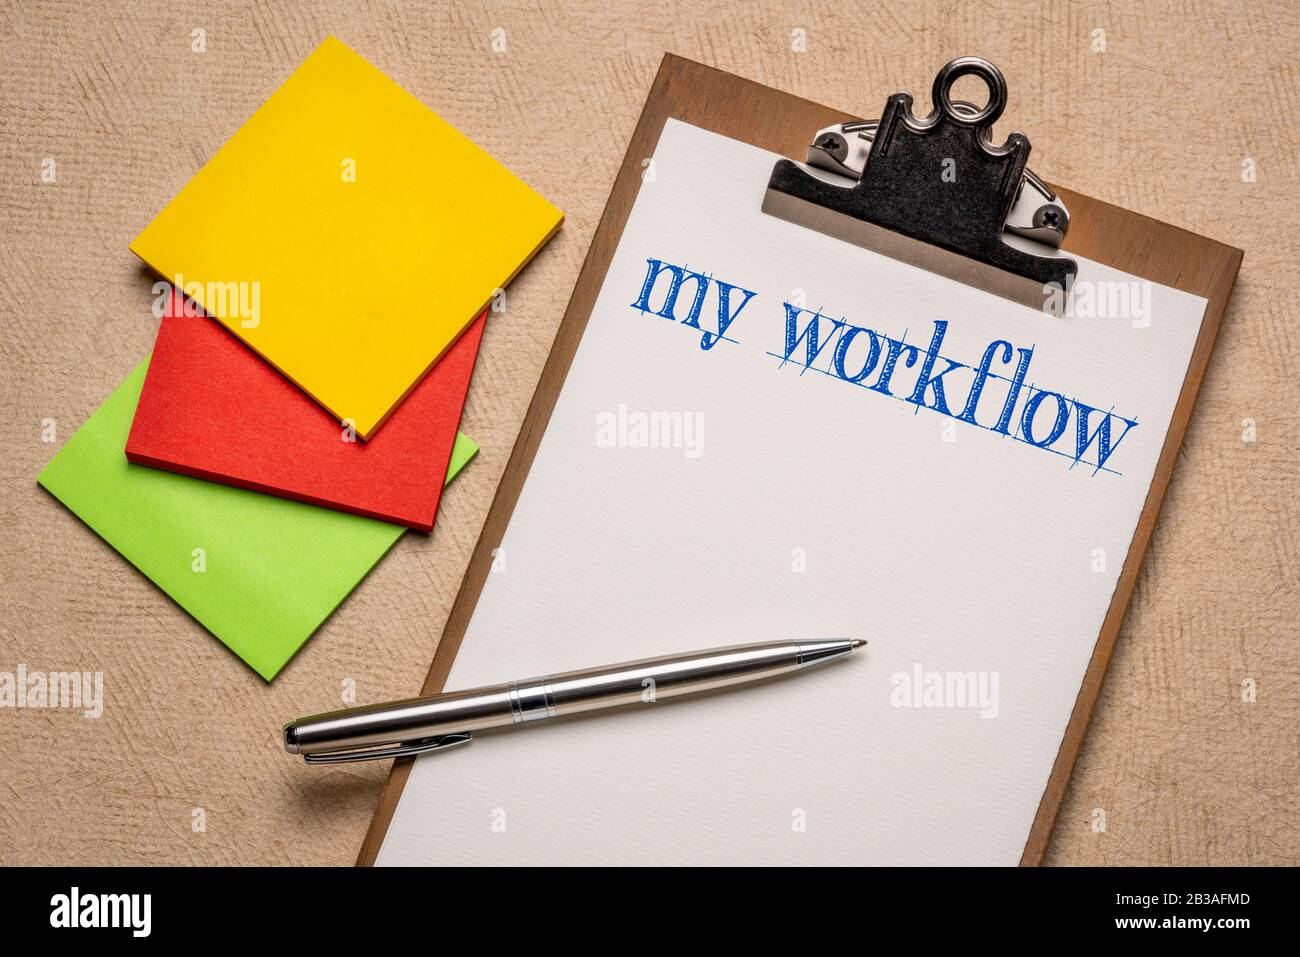 my workflow - handwriting on a clipboard, business planning, project, efficiency and productivity concept Stock Photo